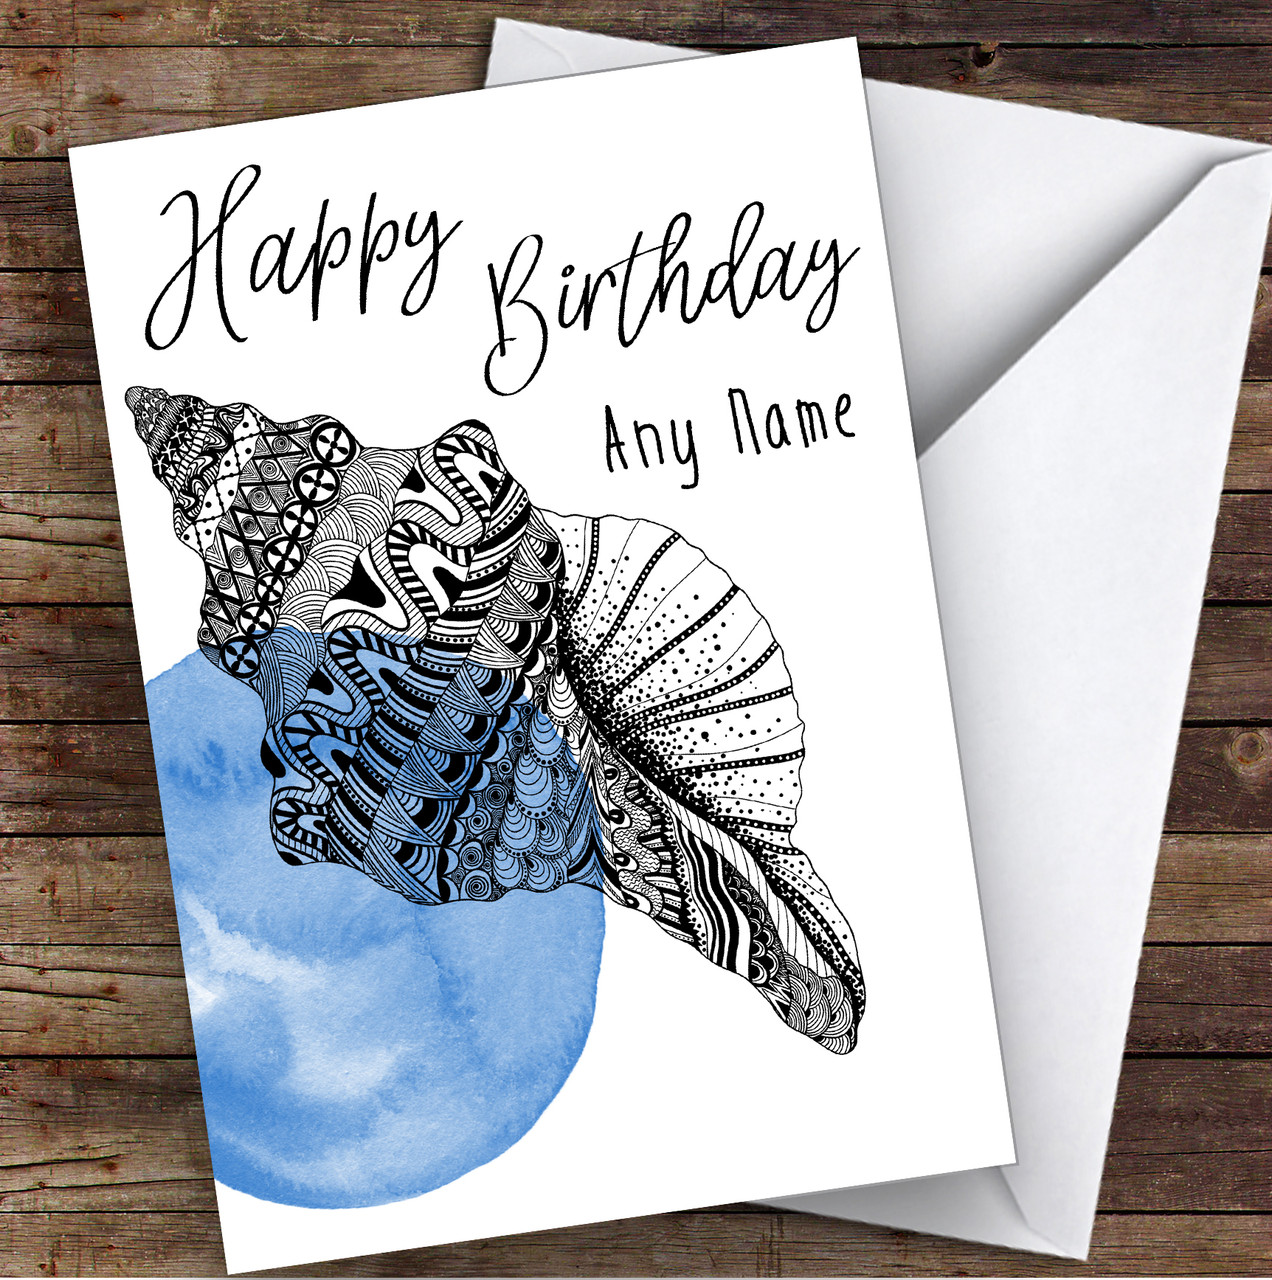 Watercolor Sealife Sea Shell Personalized Birthday Greetings Card